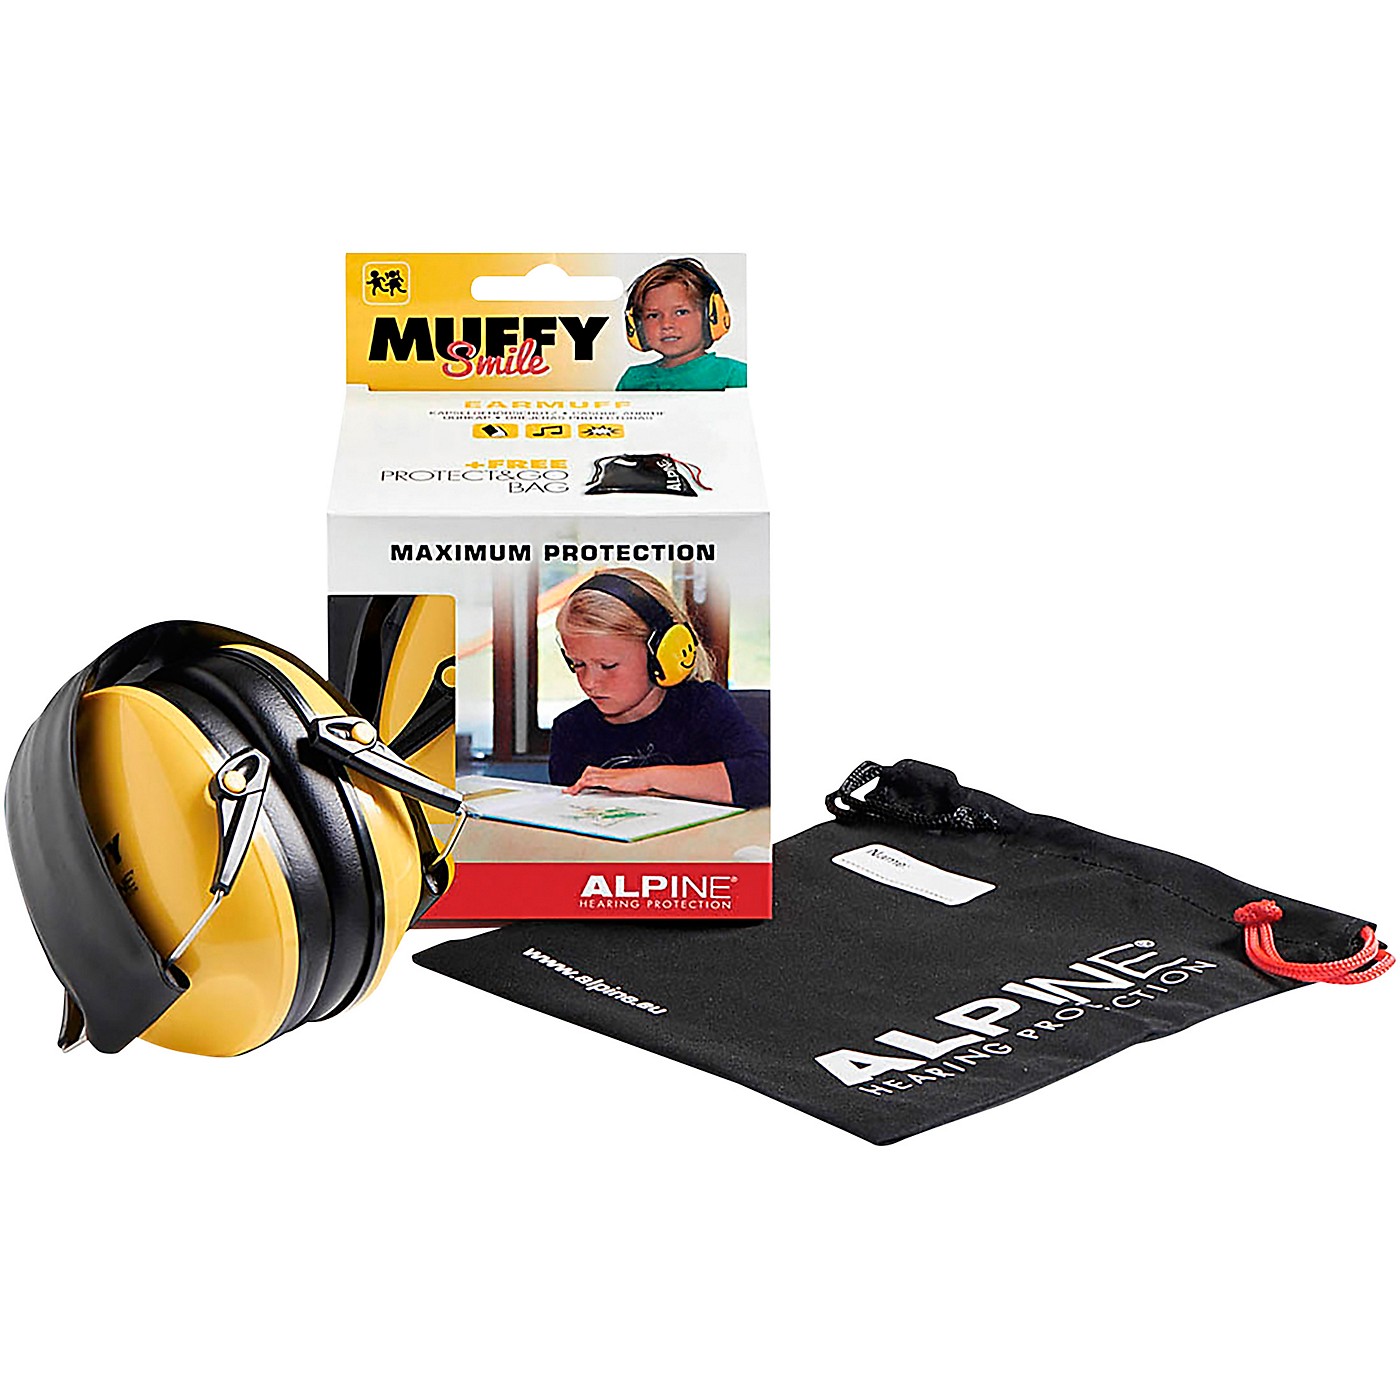 Alpine Hearing Protection Muffy Smile Yellow Protective Headphones thumbnail